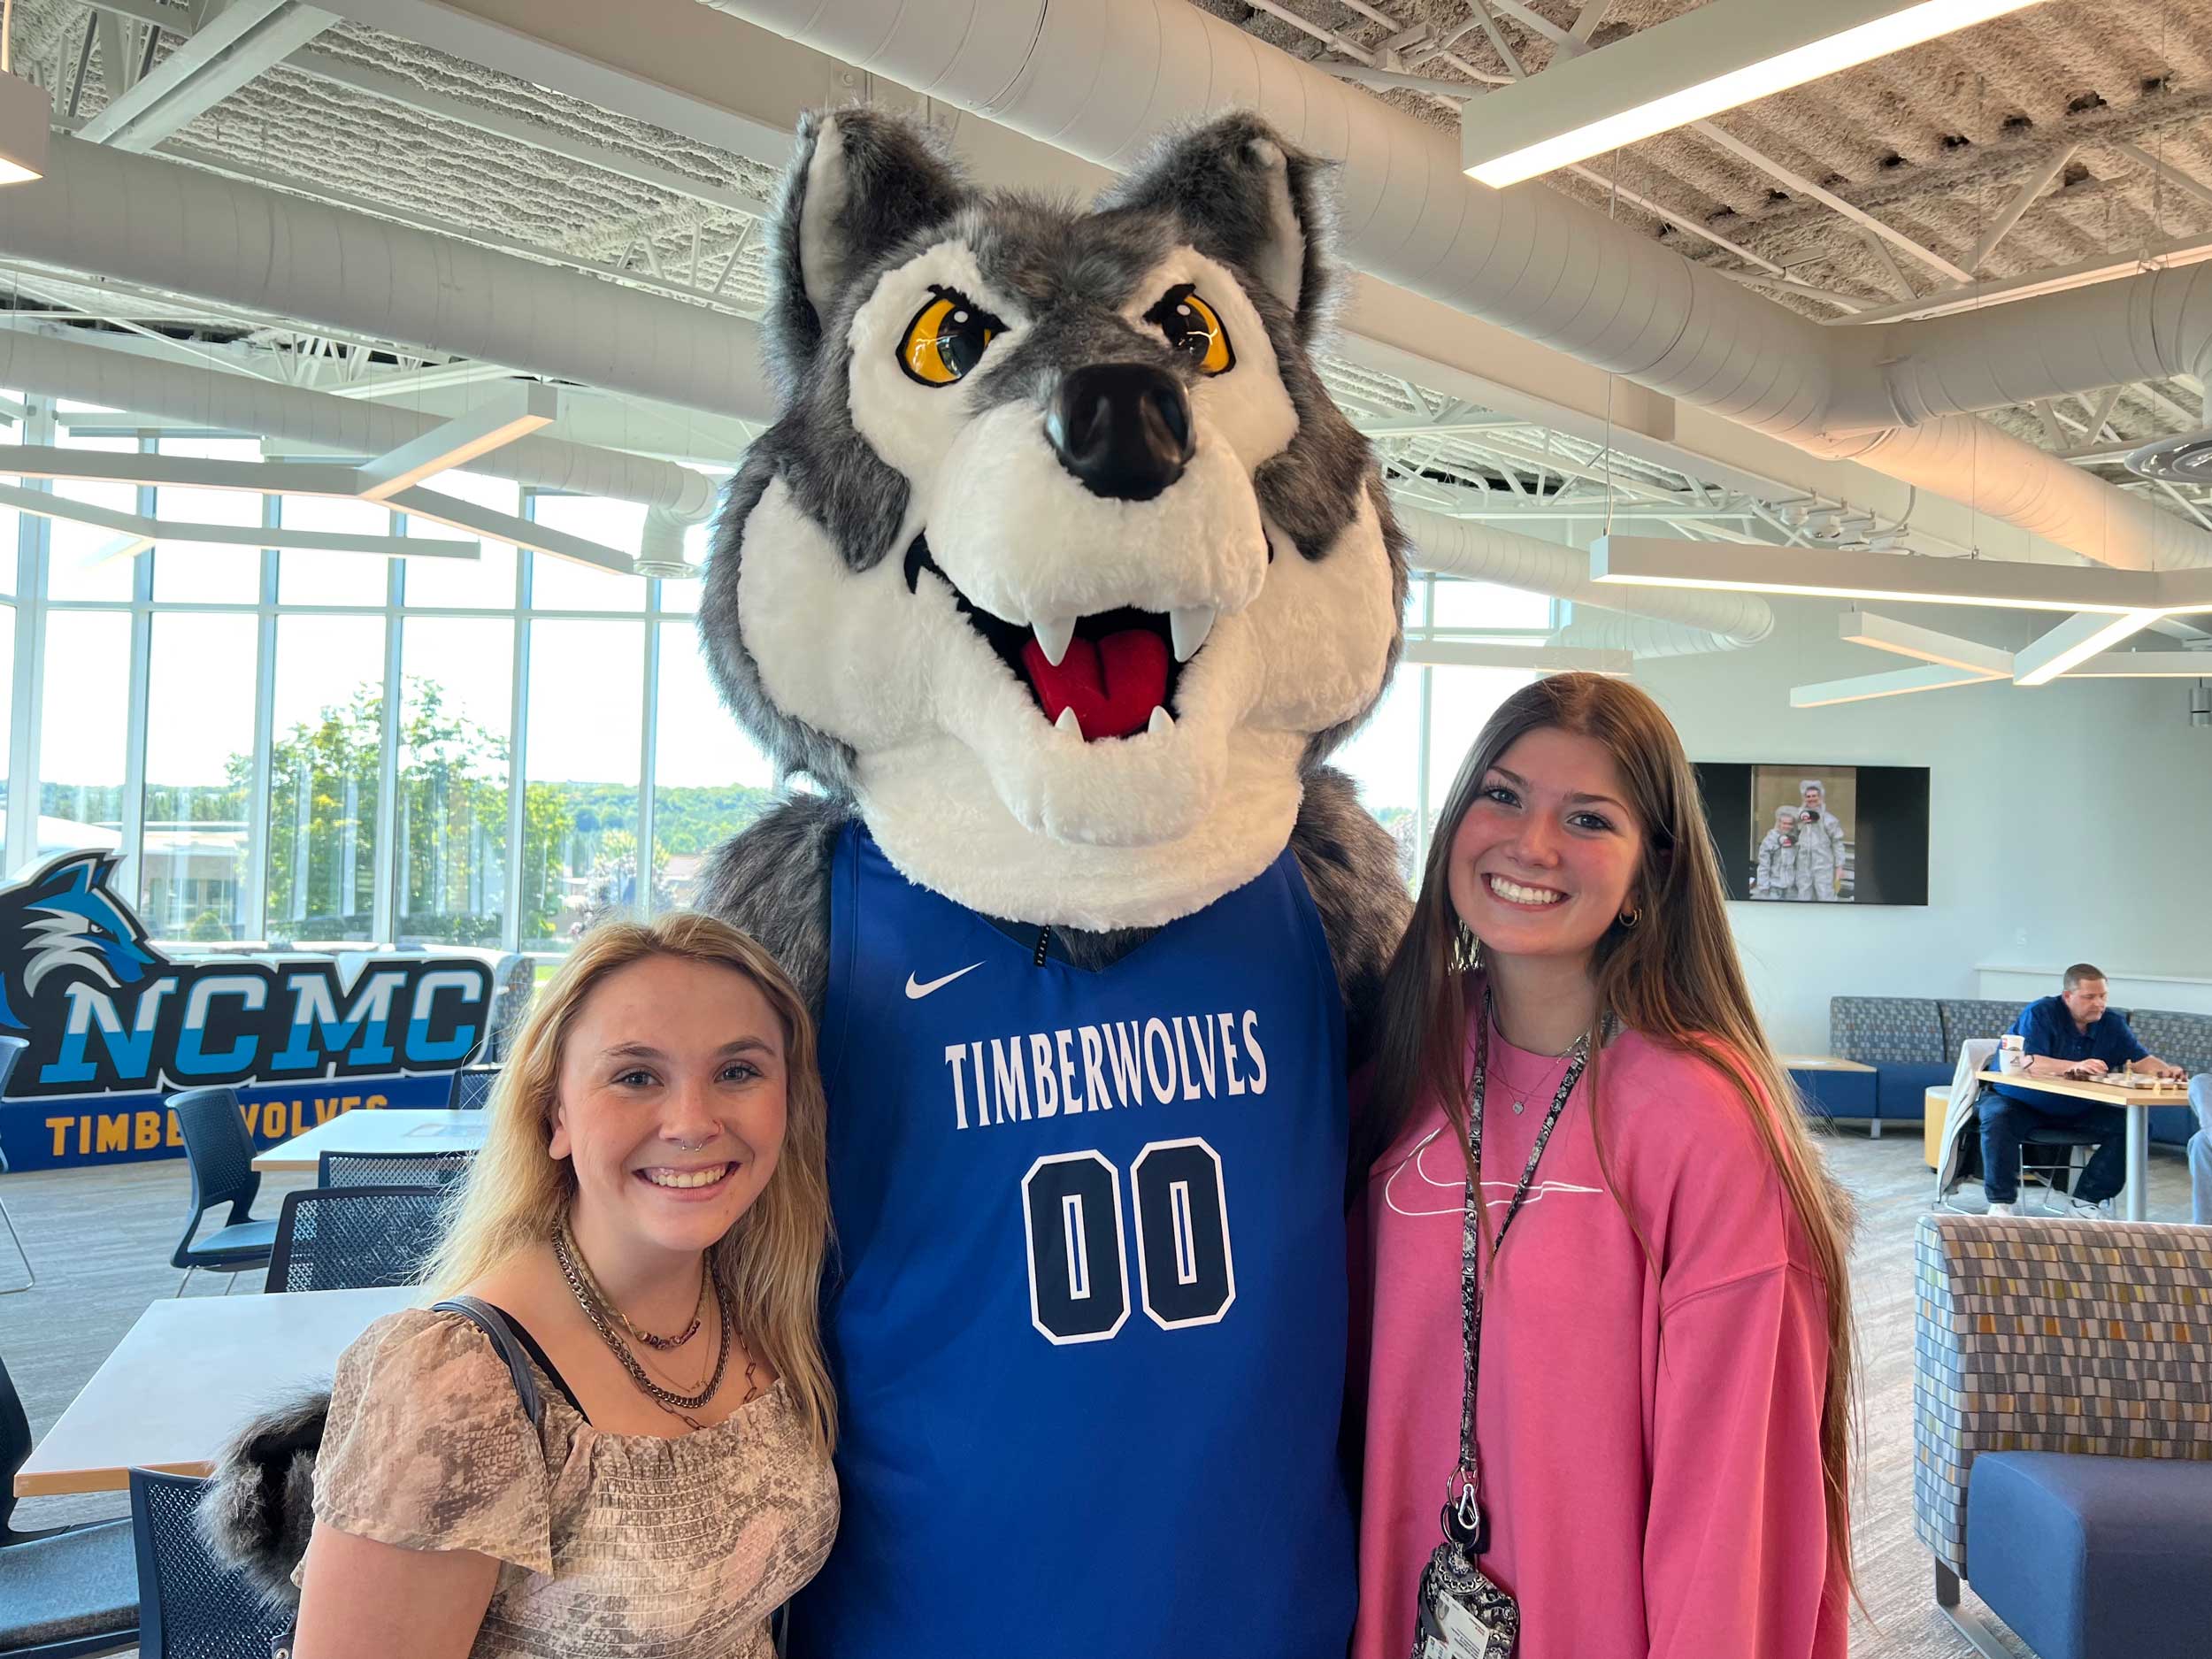 Students standing with the Timberwolf